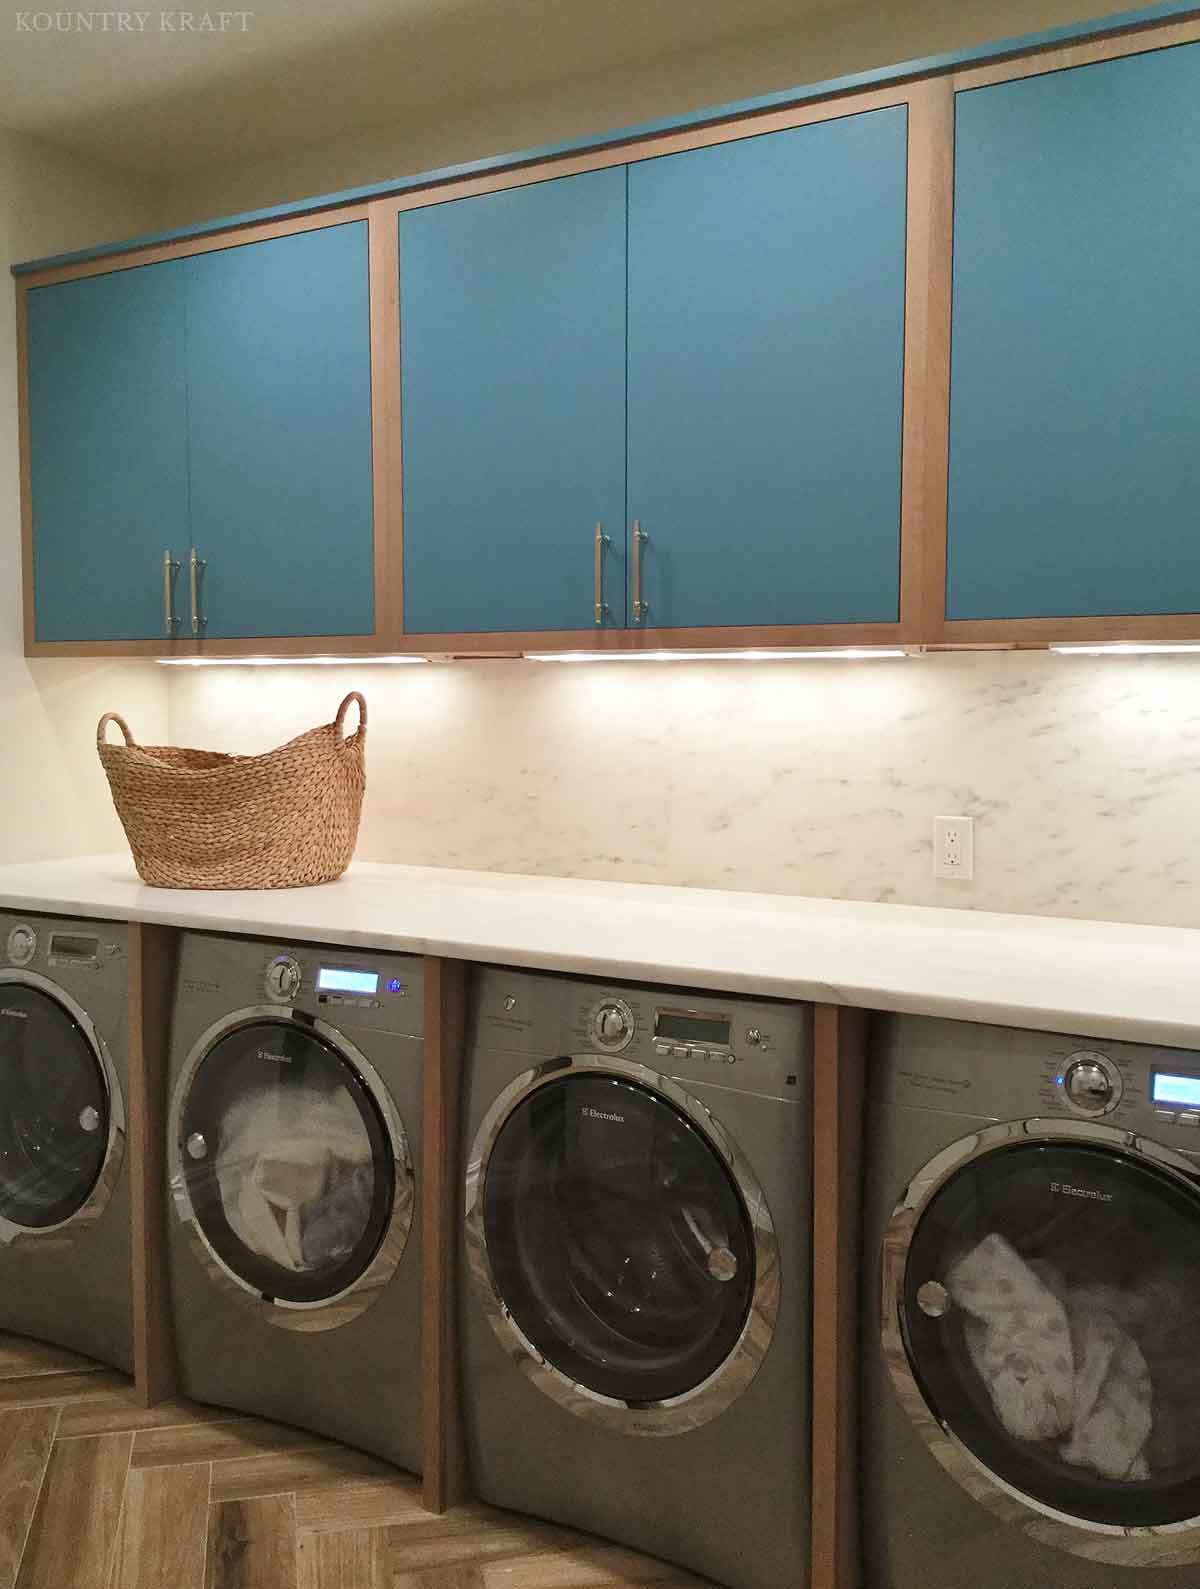 Laundry room with manitou blue cabinets and counter over four machines Greenwich, CT